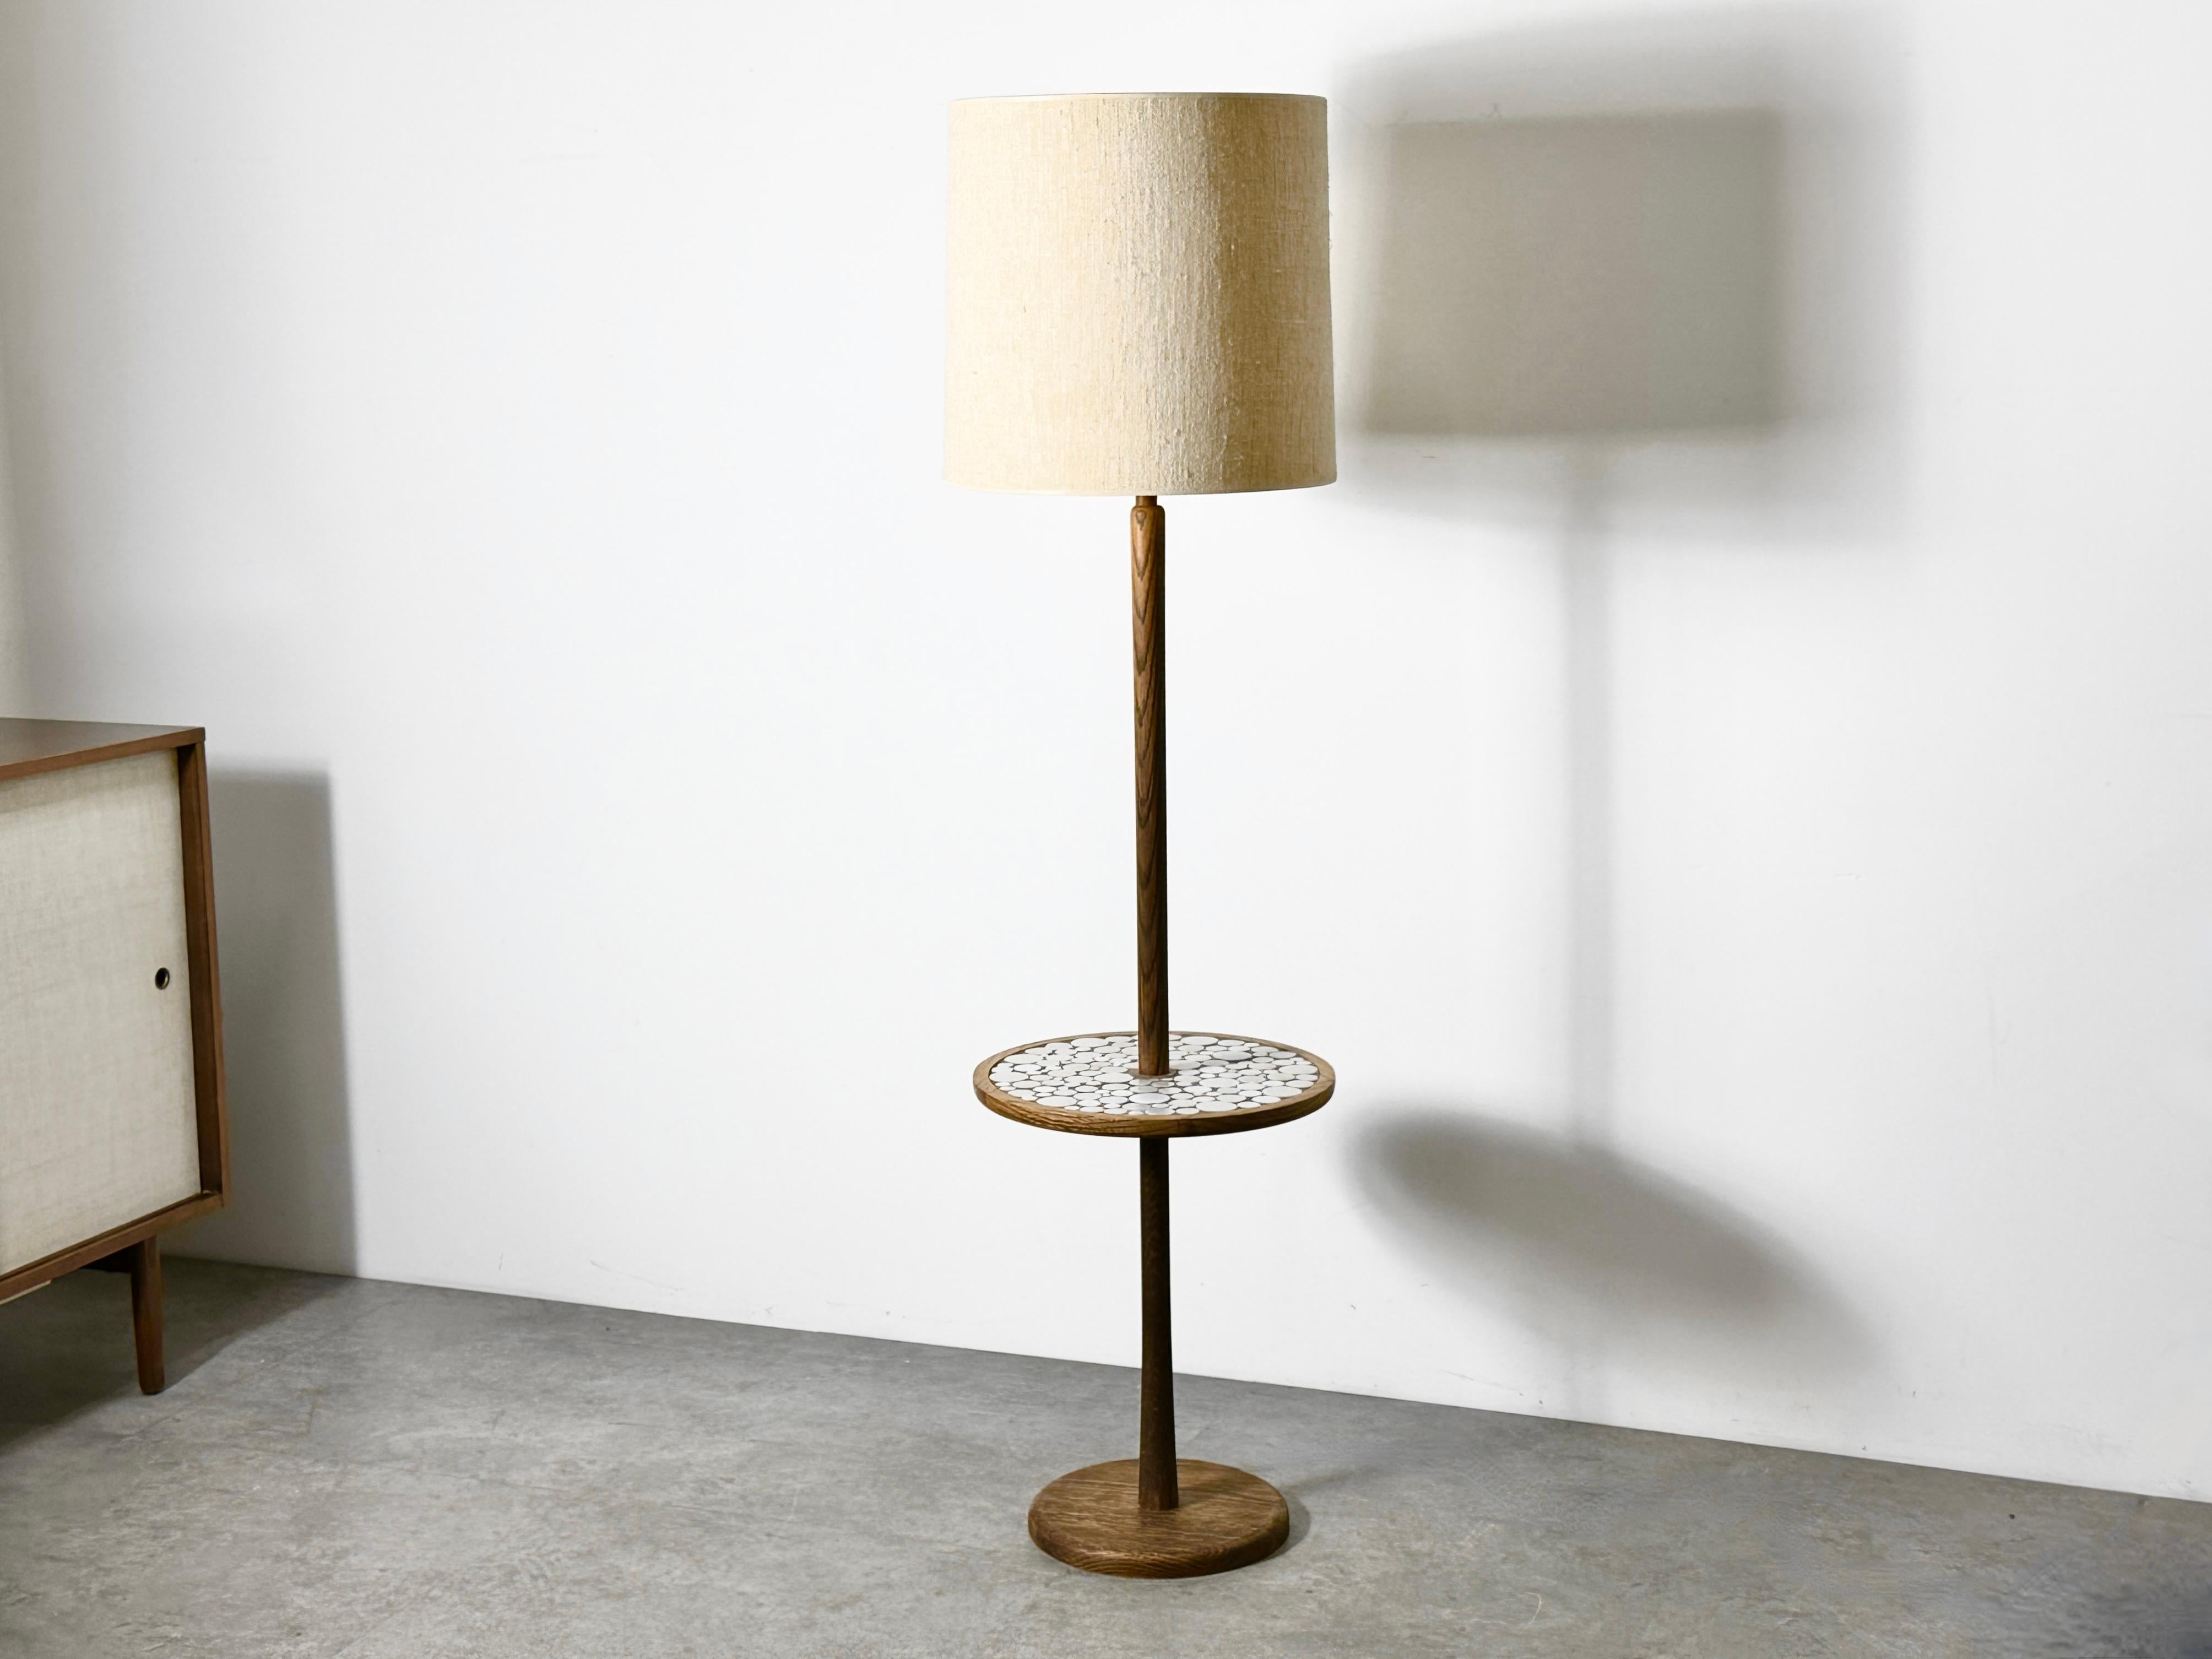 1960s floor lamp with floating table by Gordon and Jane Martz for Marshall Studios
Solid oak construction with inlaid mosaic matte white circle tile surface
Original shade and finial